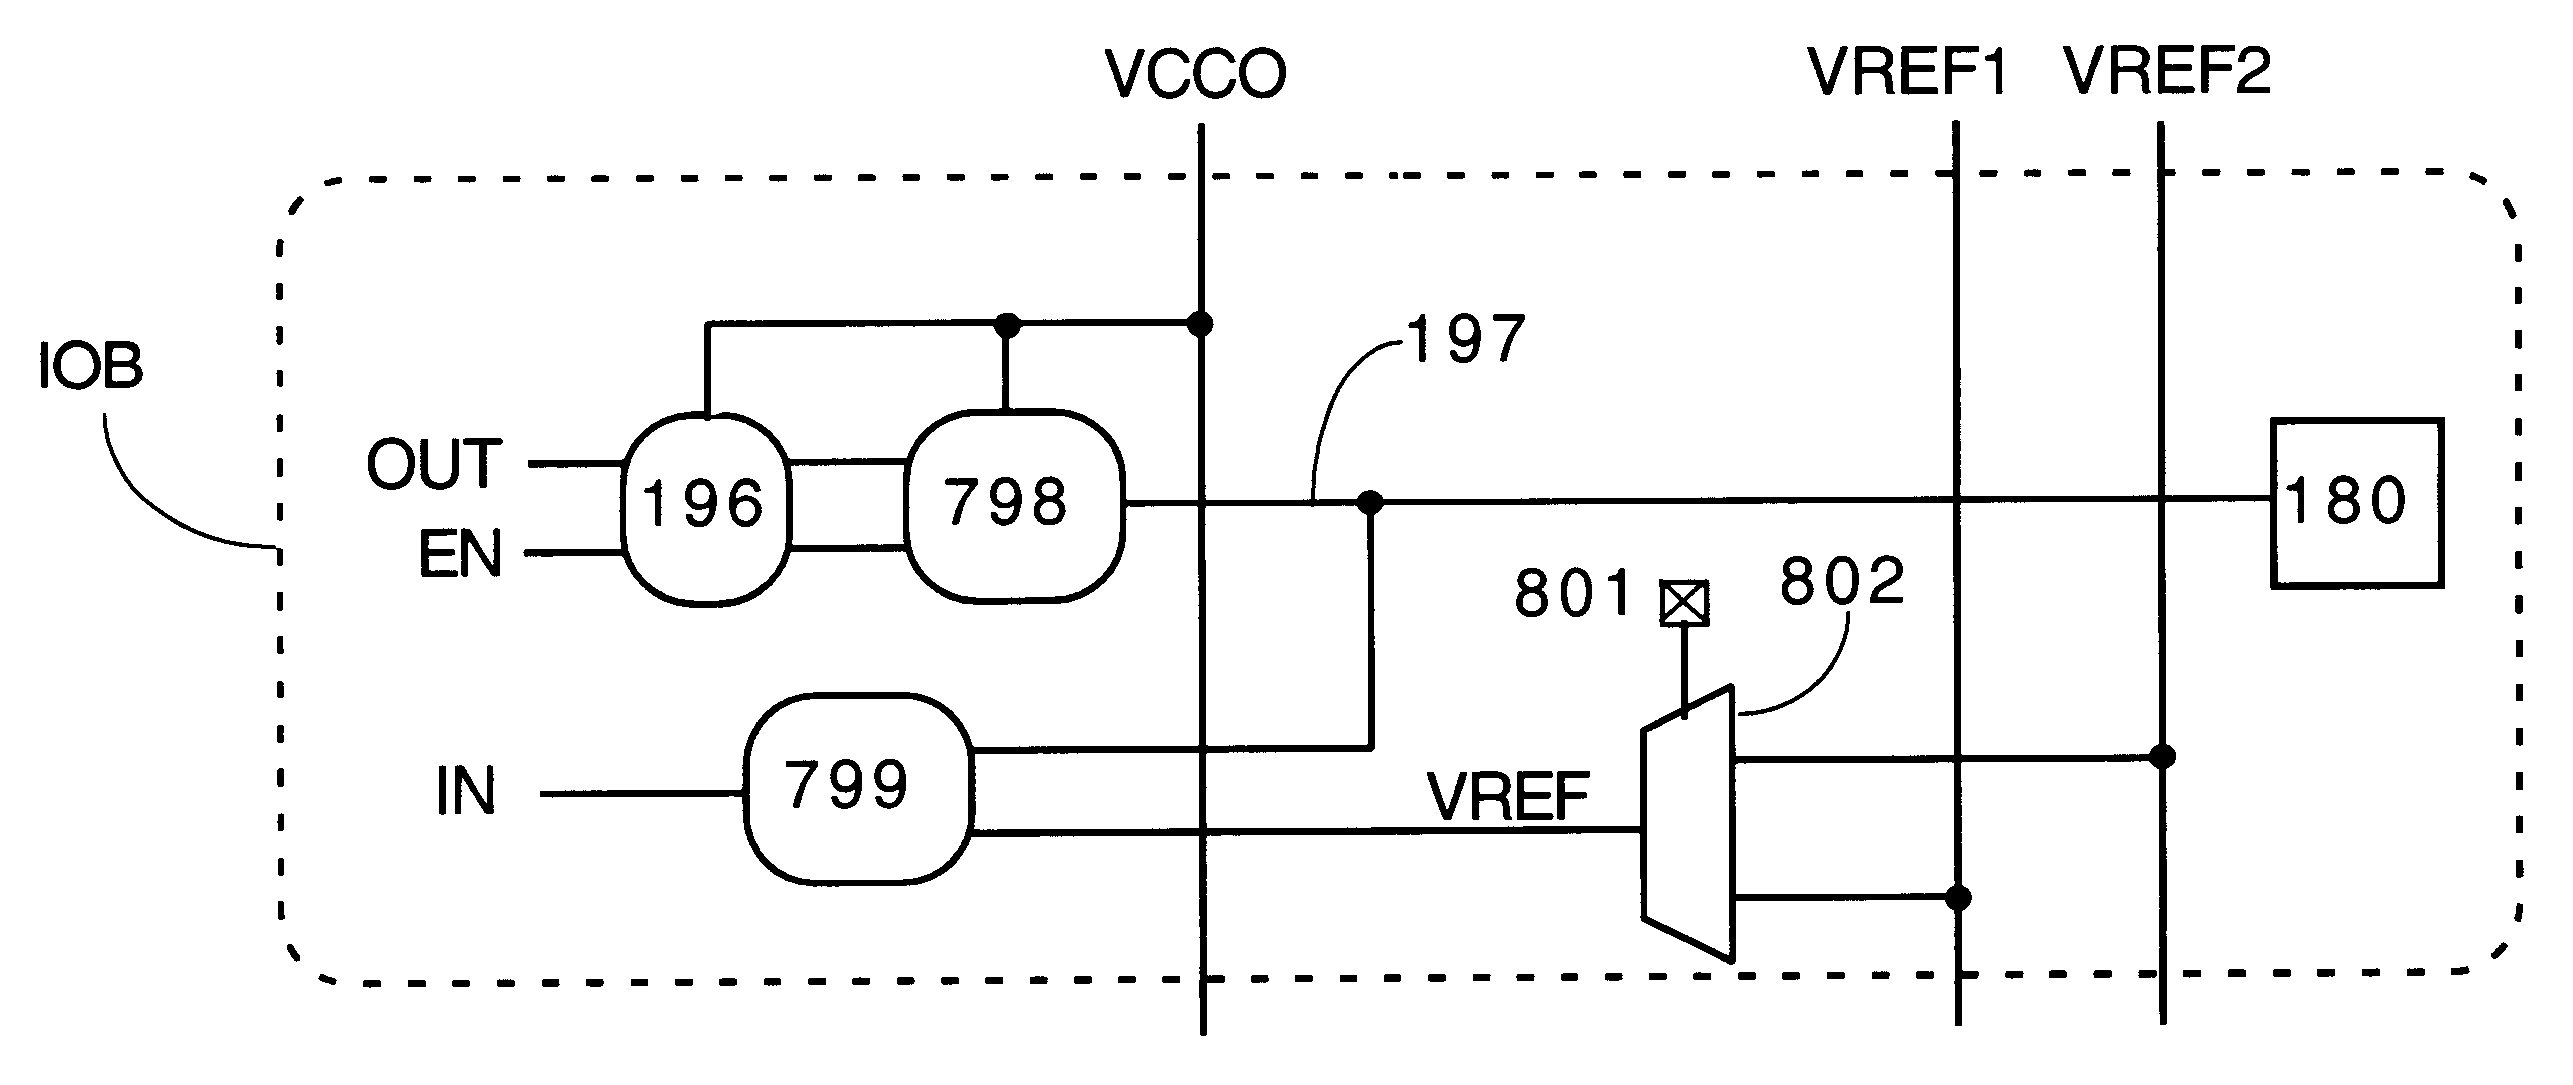 FPGA with a plurality of input reference voltage levels grouped into sets